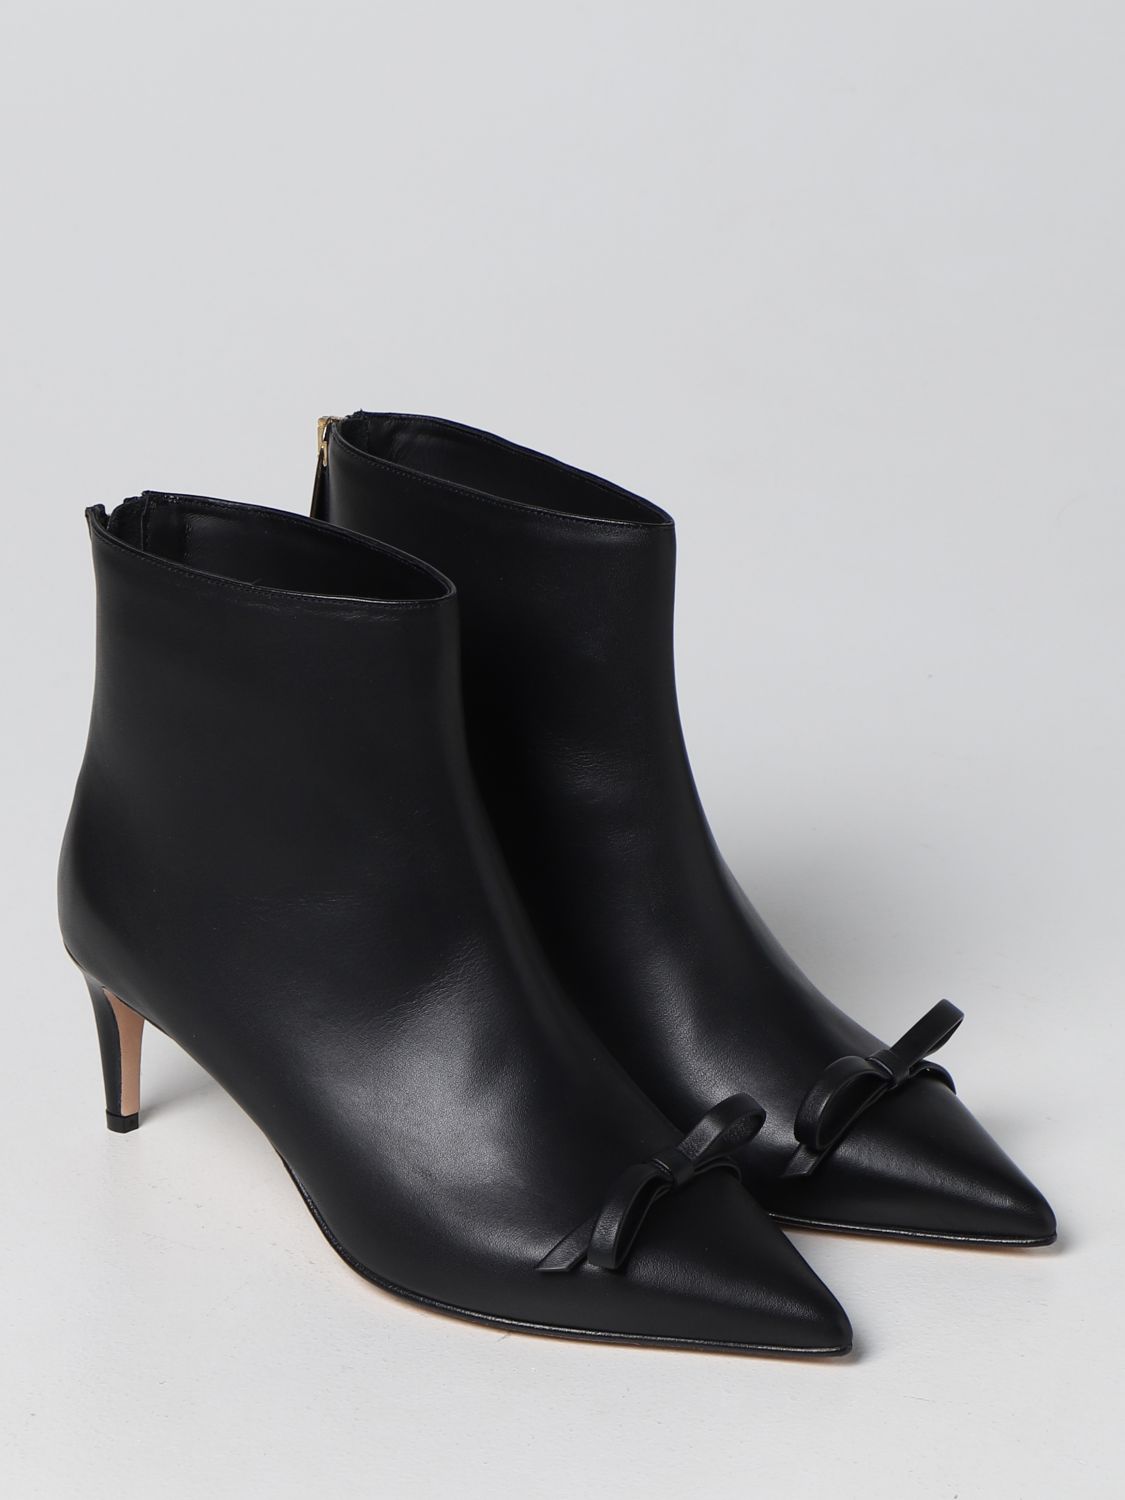 Heeled booties Red(V): Red (V) ankle boots in smooth leather black 2